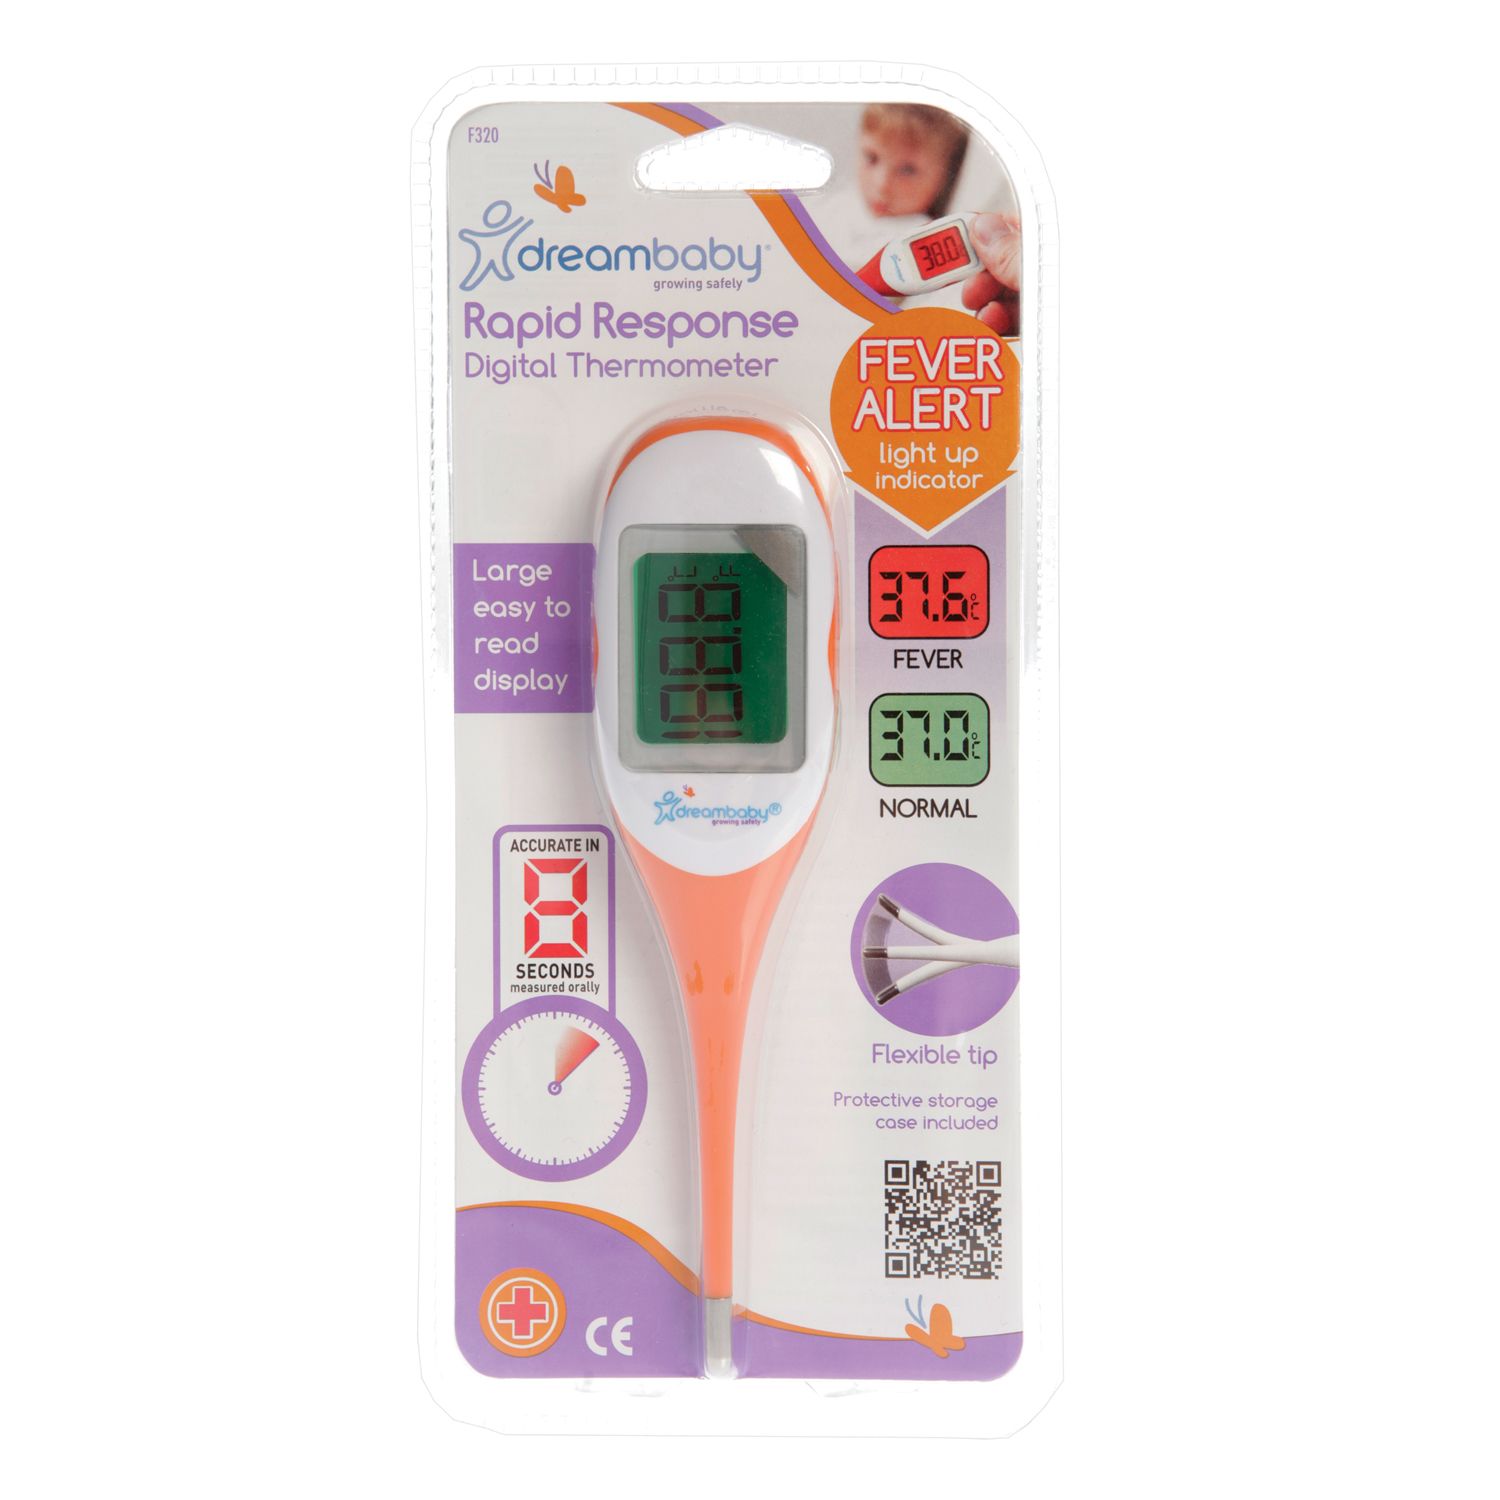 Image for Dreambaby Rapid Response Digital Thermometer at Kohl's.